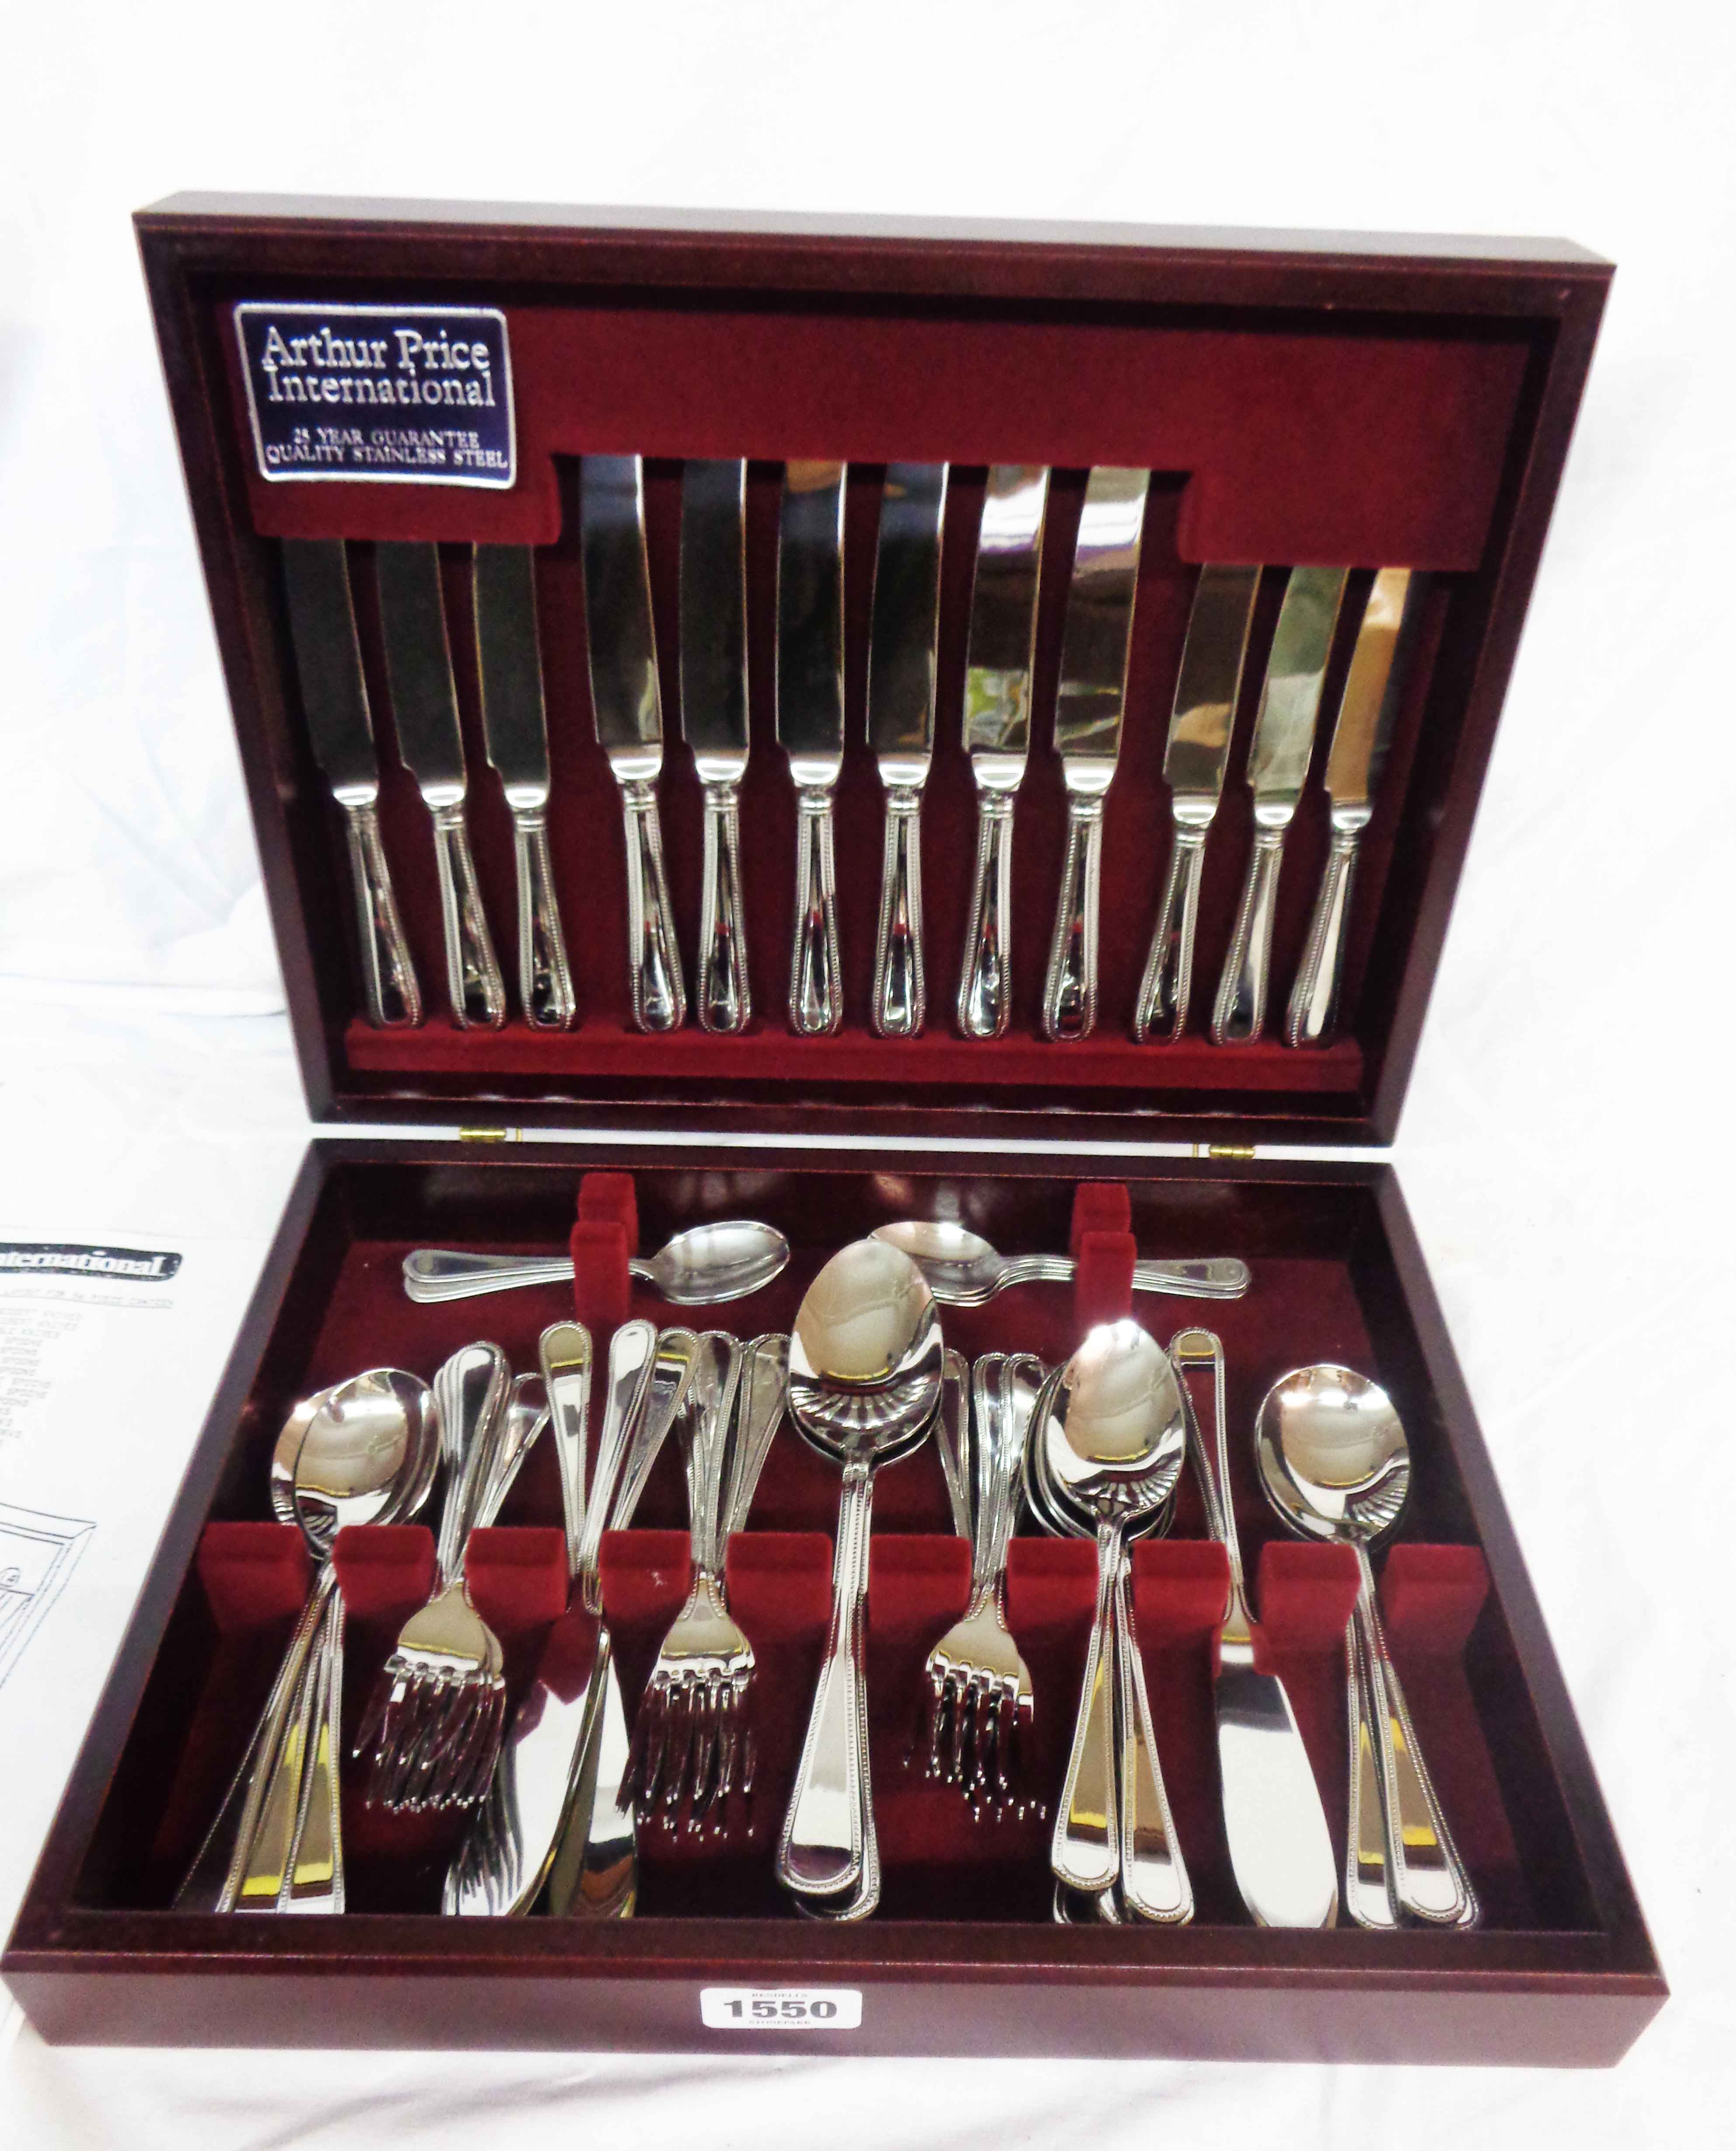 A canteen containing a six place setting of Arthur Price stainless steel cutlery